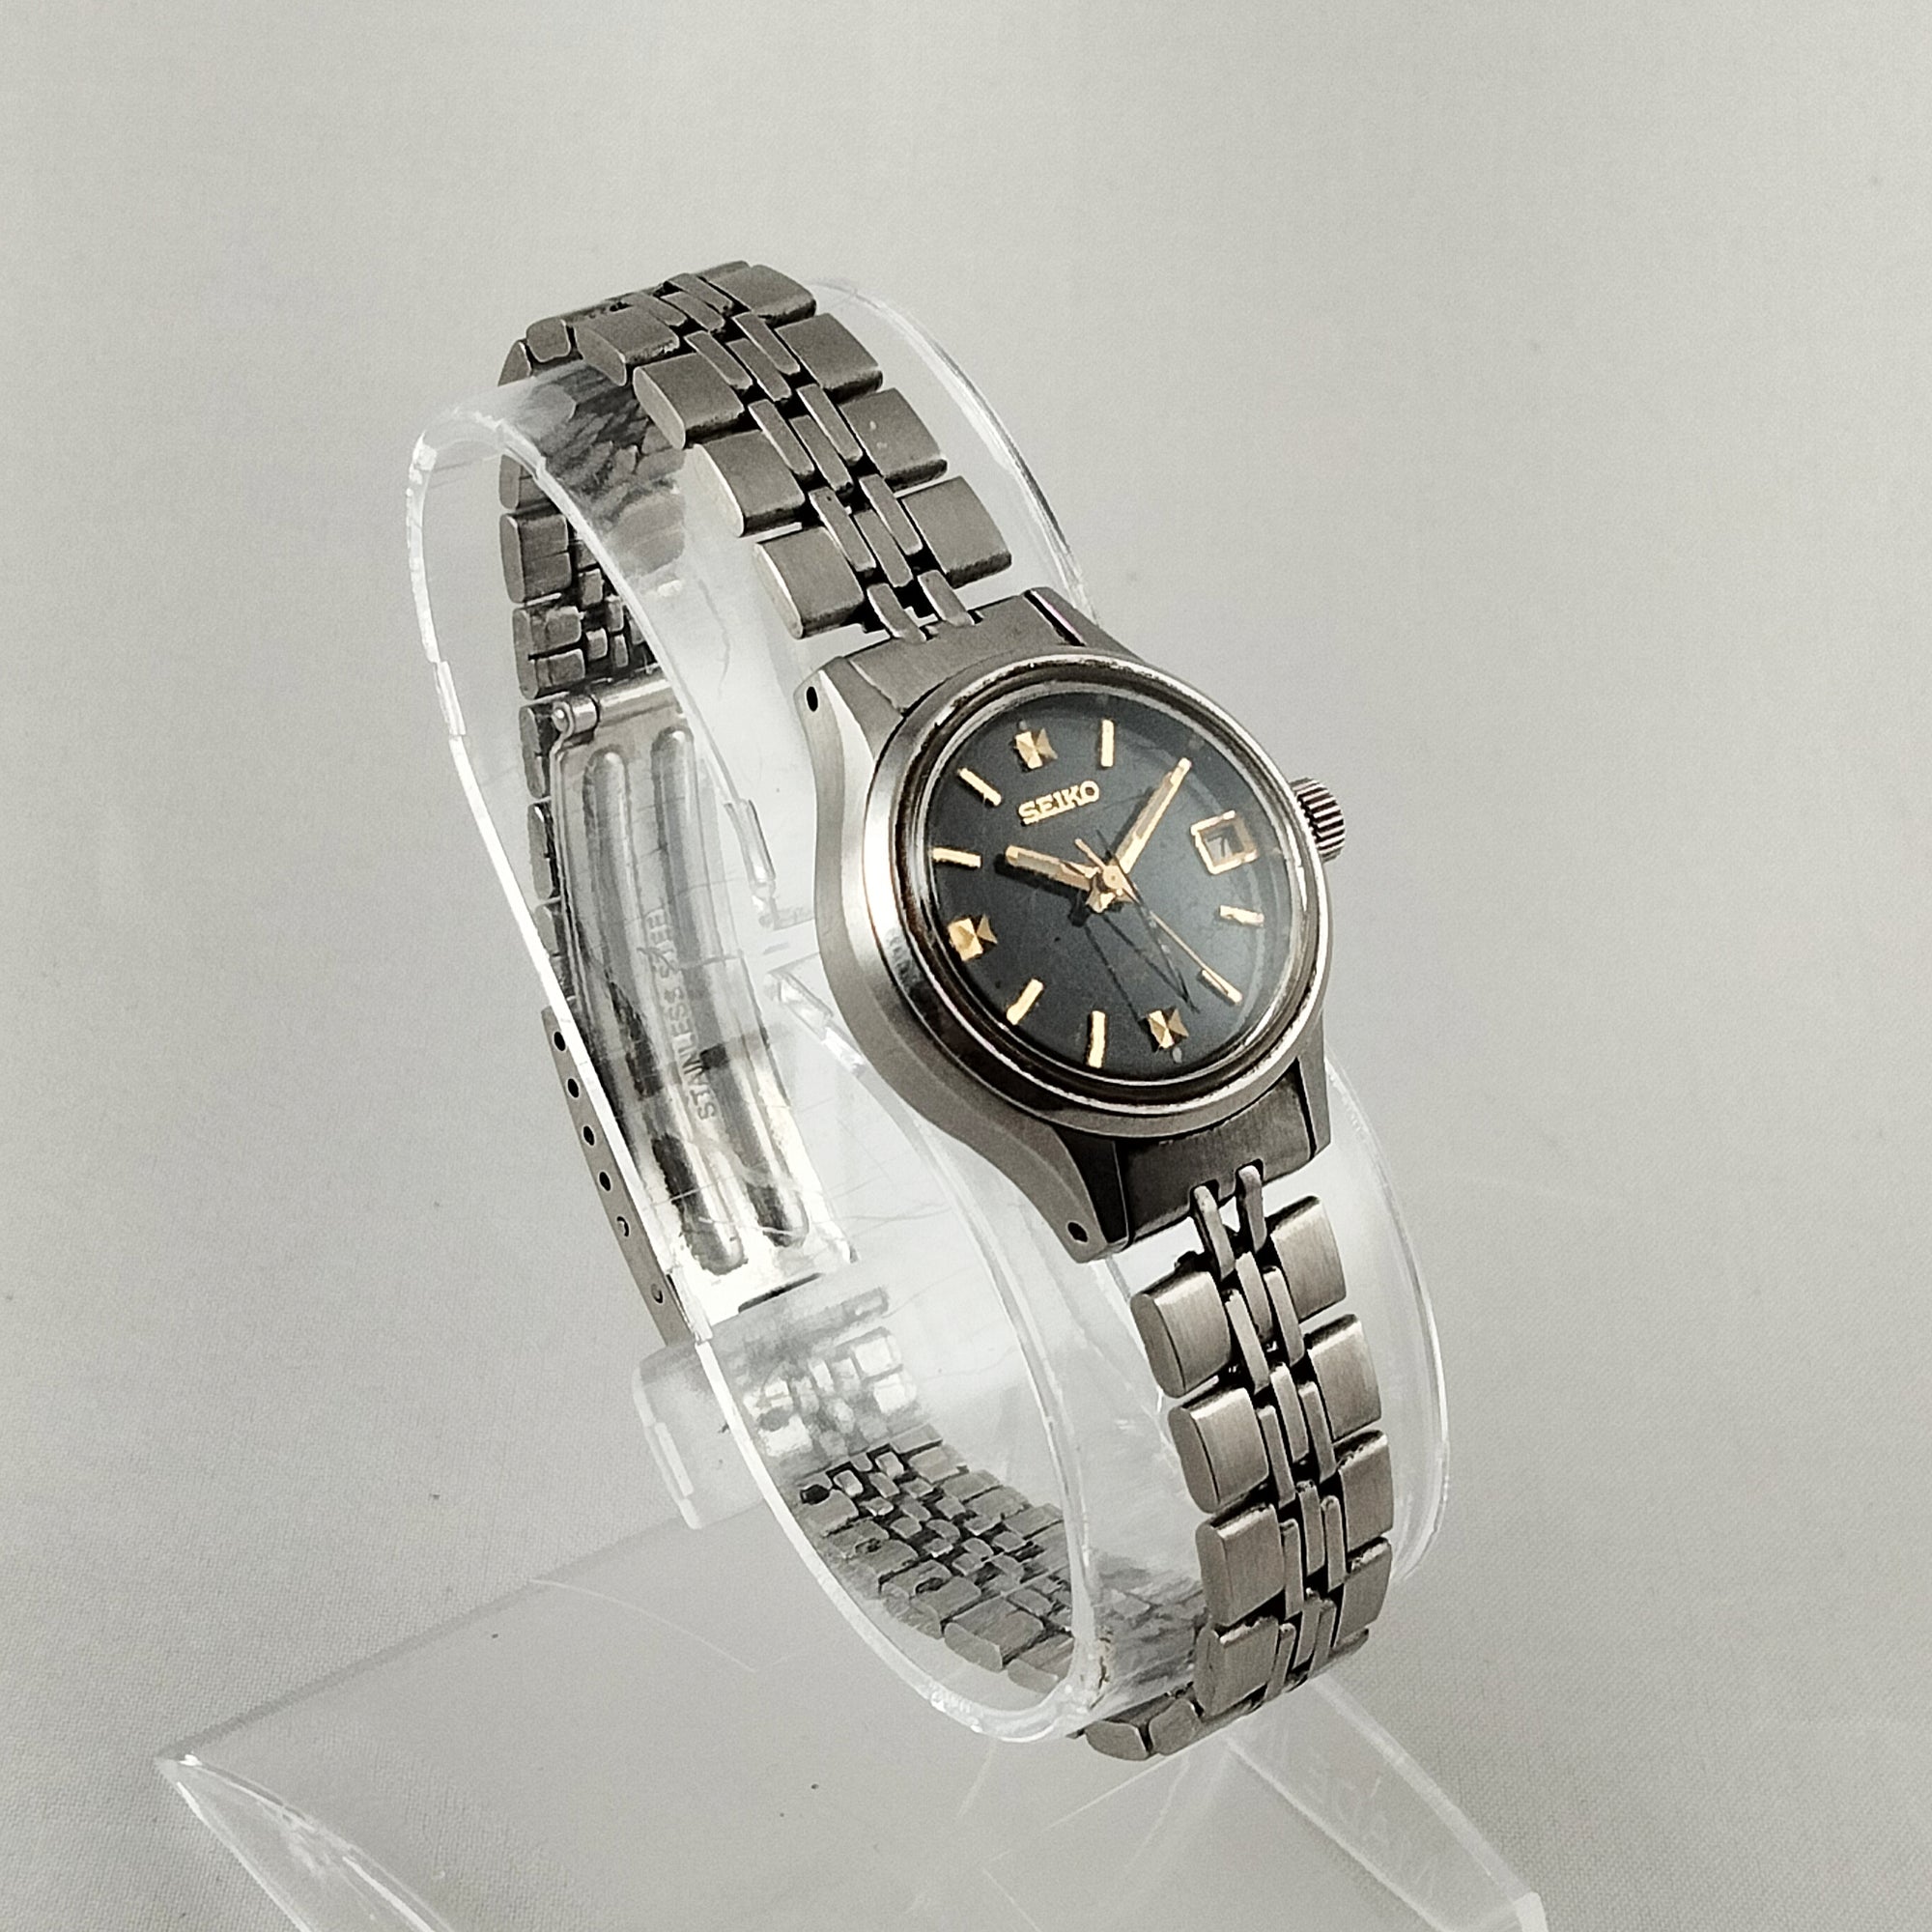 Seiko Men's Watch, Black Dial with Faceted Hour Markers, Bracelet Strap